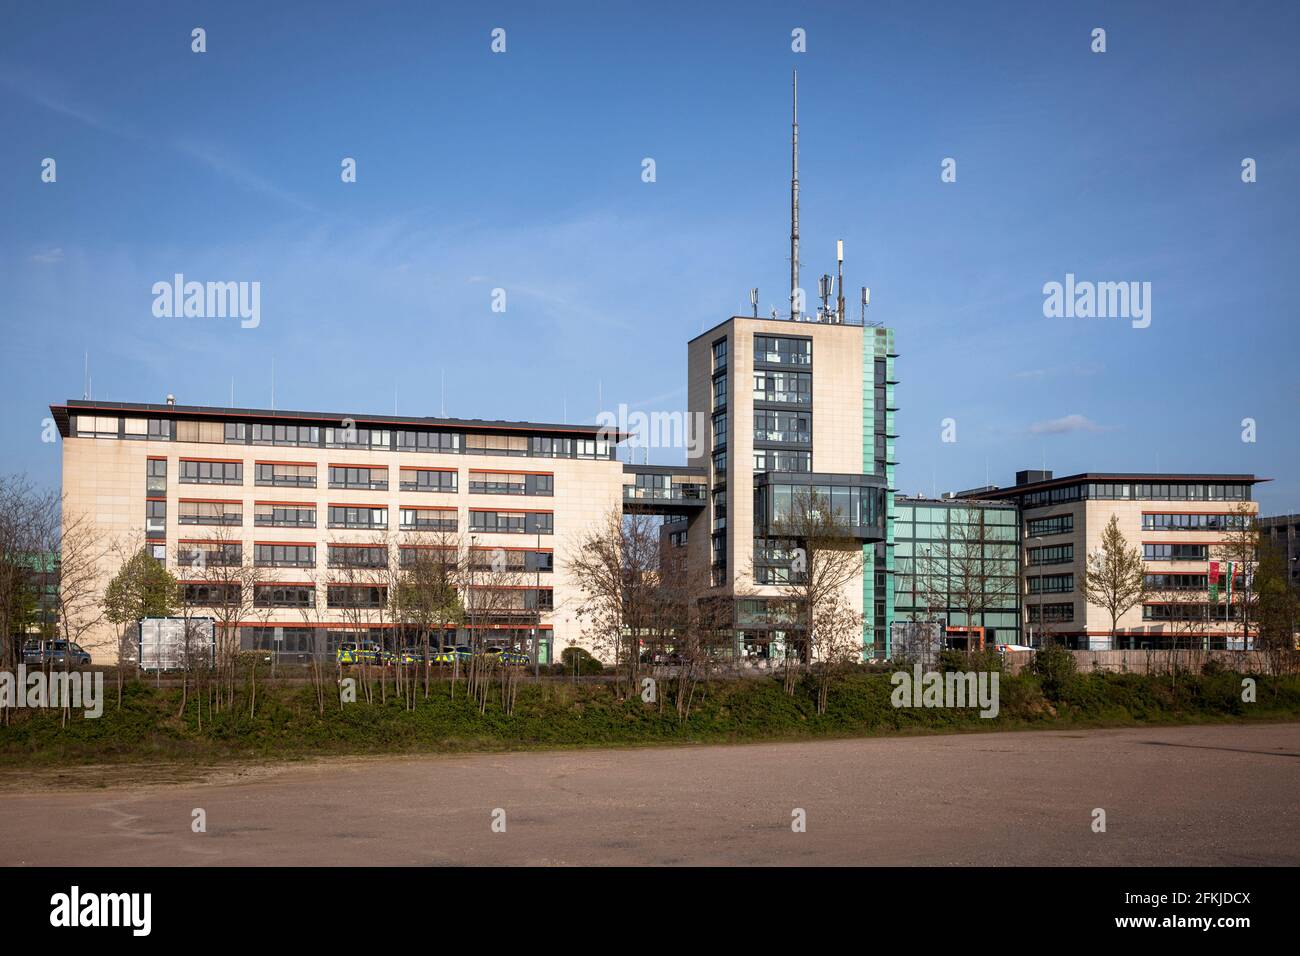 the Cologne police headquarters on Walter-Pauli-Ring in the district of Kalk, Cologne, Germany.  das Polizeipraesidium Koeln am Walter-Pauli-Ring im S Stock Photo